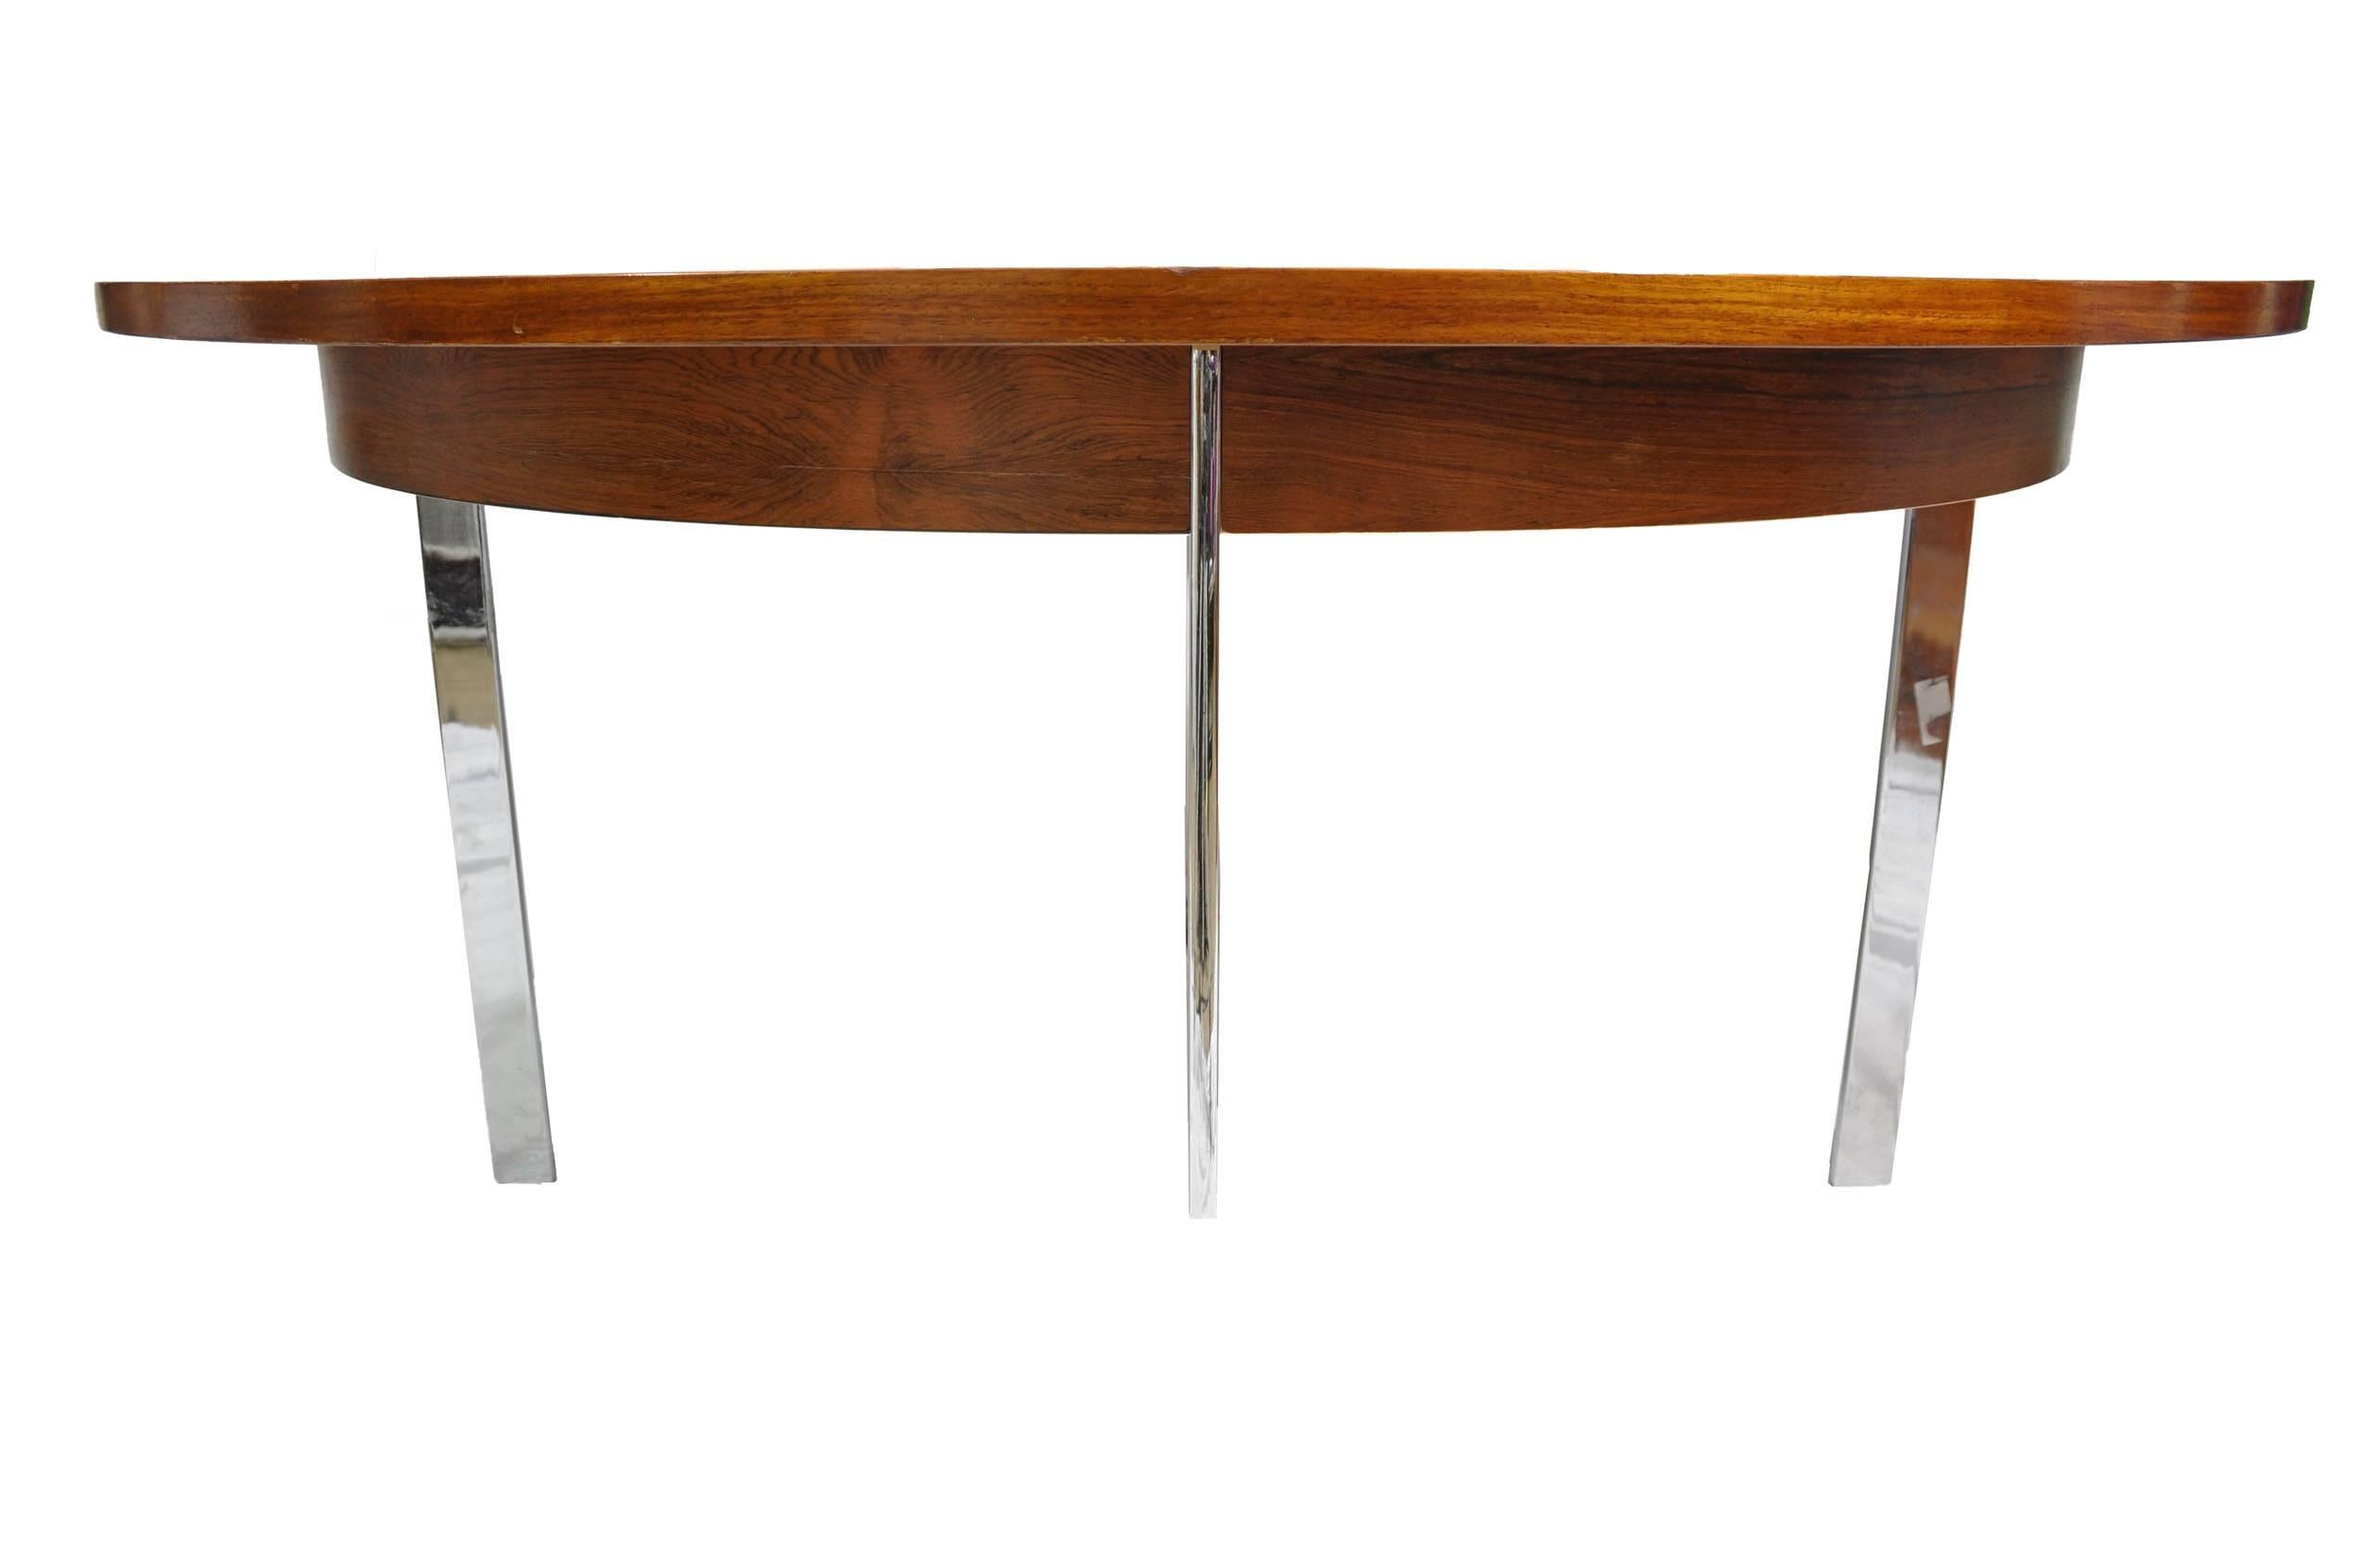 Italian Mid-Century Modern chrome and wood circular dining table veneered in black limba from West Africa. Table set includes original chrome chairs (four) with faux leather pad seats, mid 1960s-1970s.